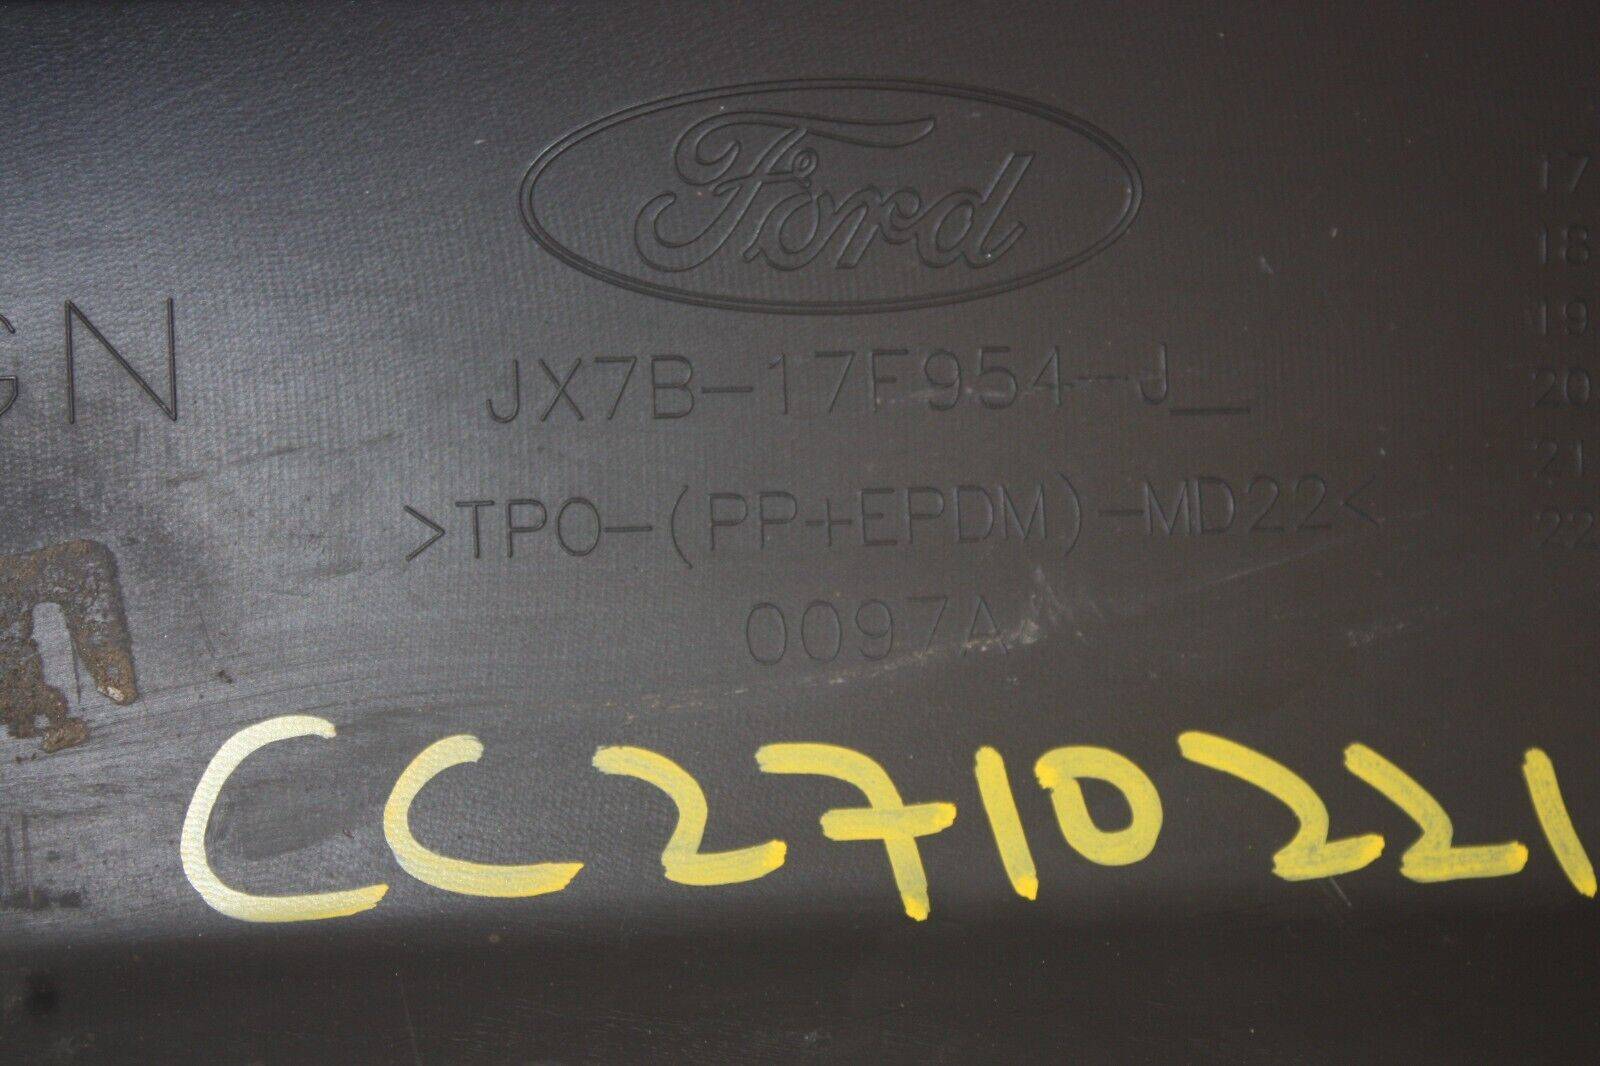 Ford-Focus-Rear-Bumper-Lower-Section-JX7B-17F954-J-Genuine-SEE-PICS-175467150053-9